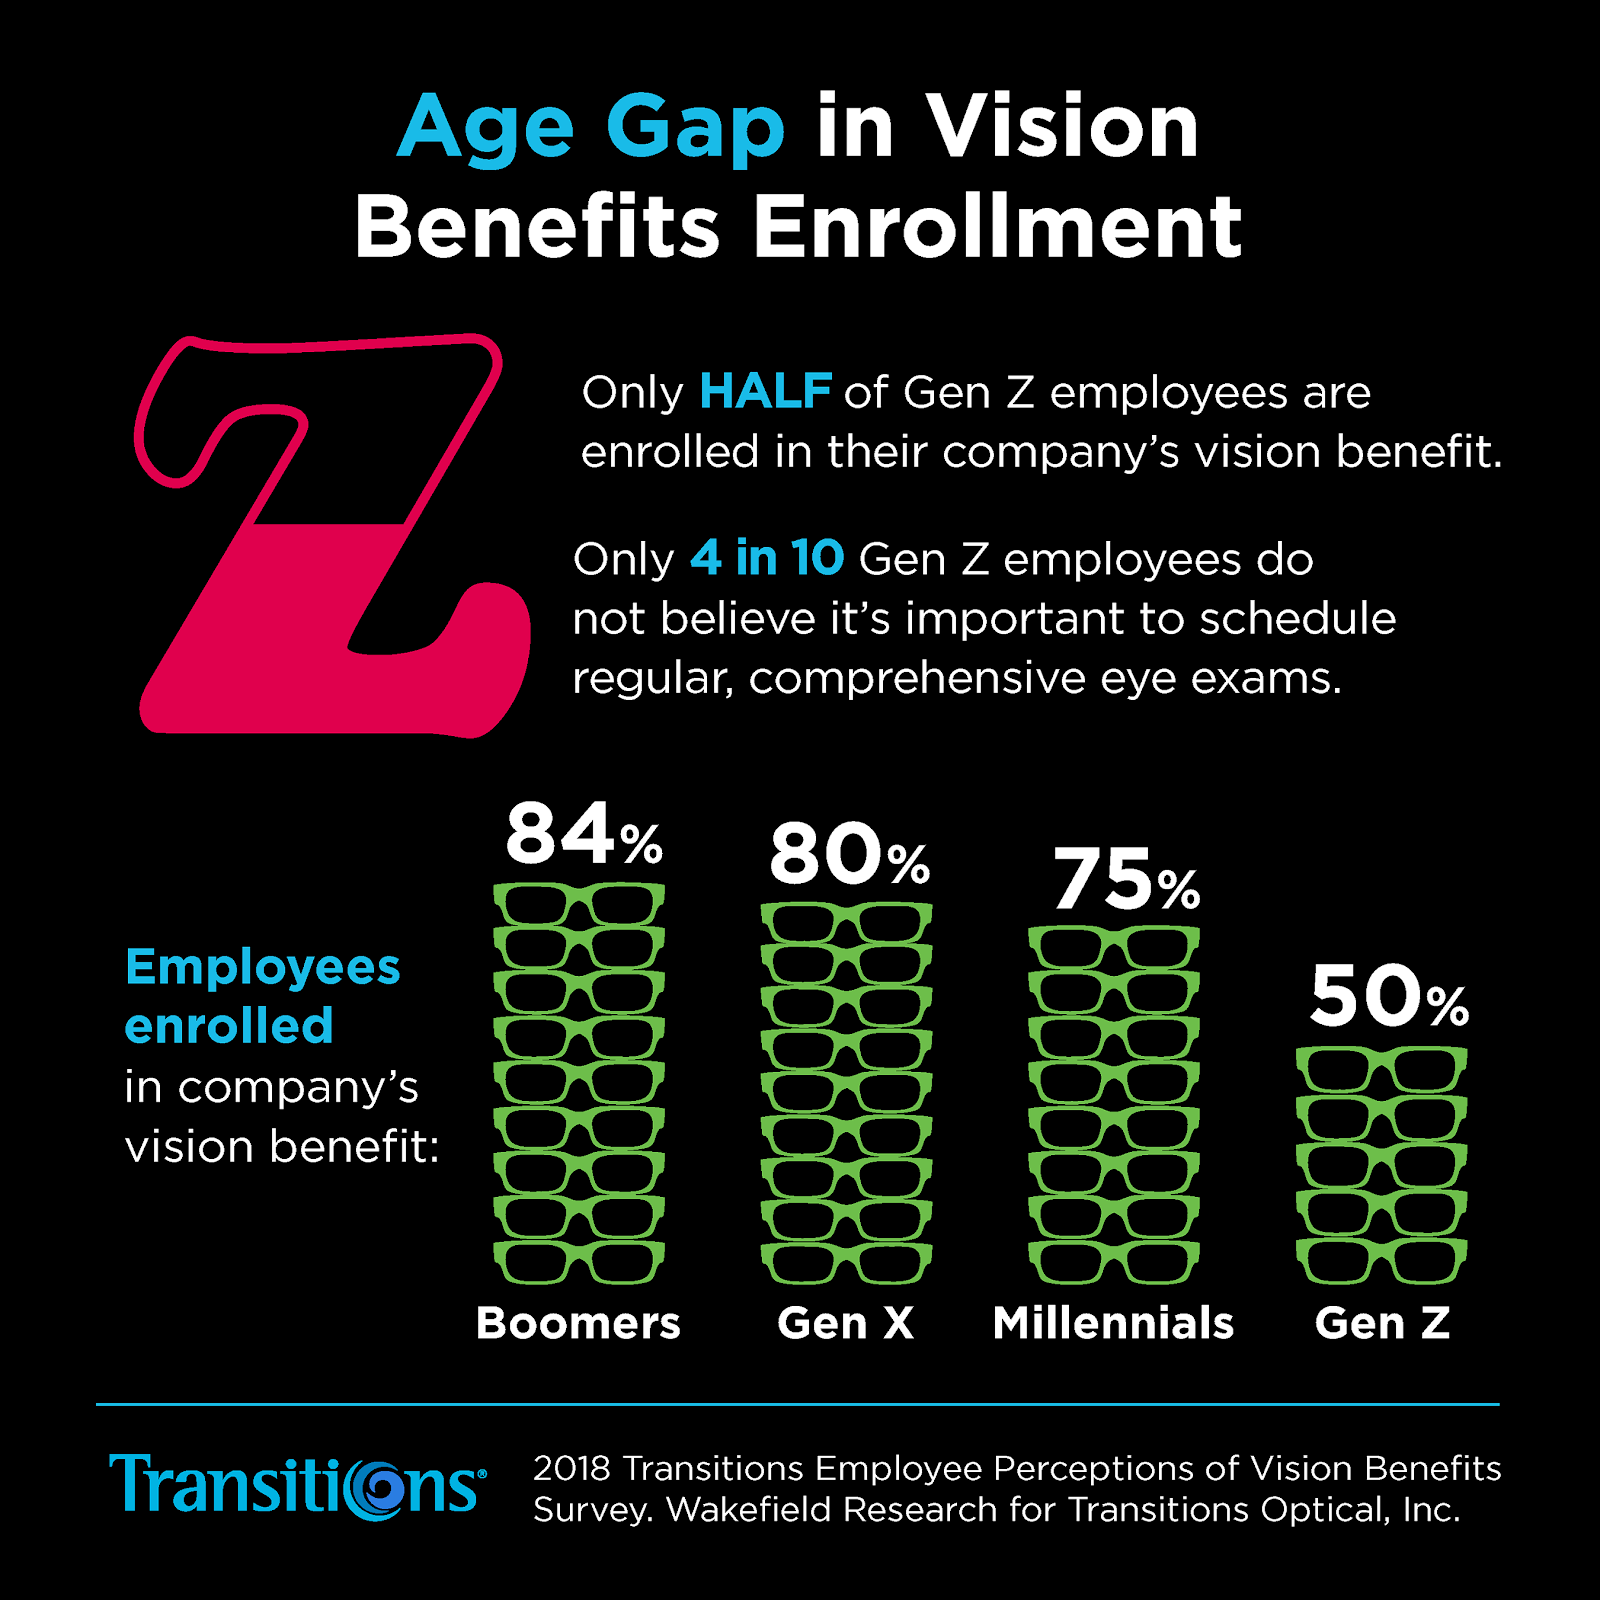 Transitions Optical Survey describes the age gap in employee vision benefits enrollment.